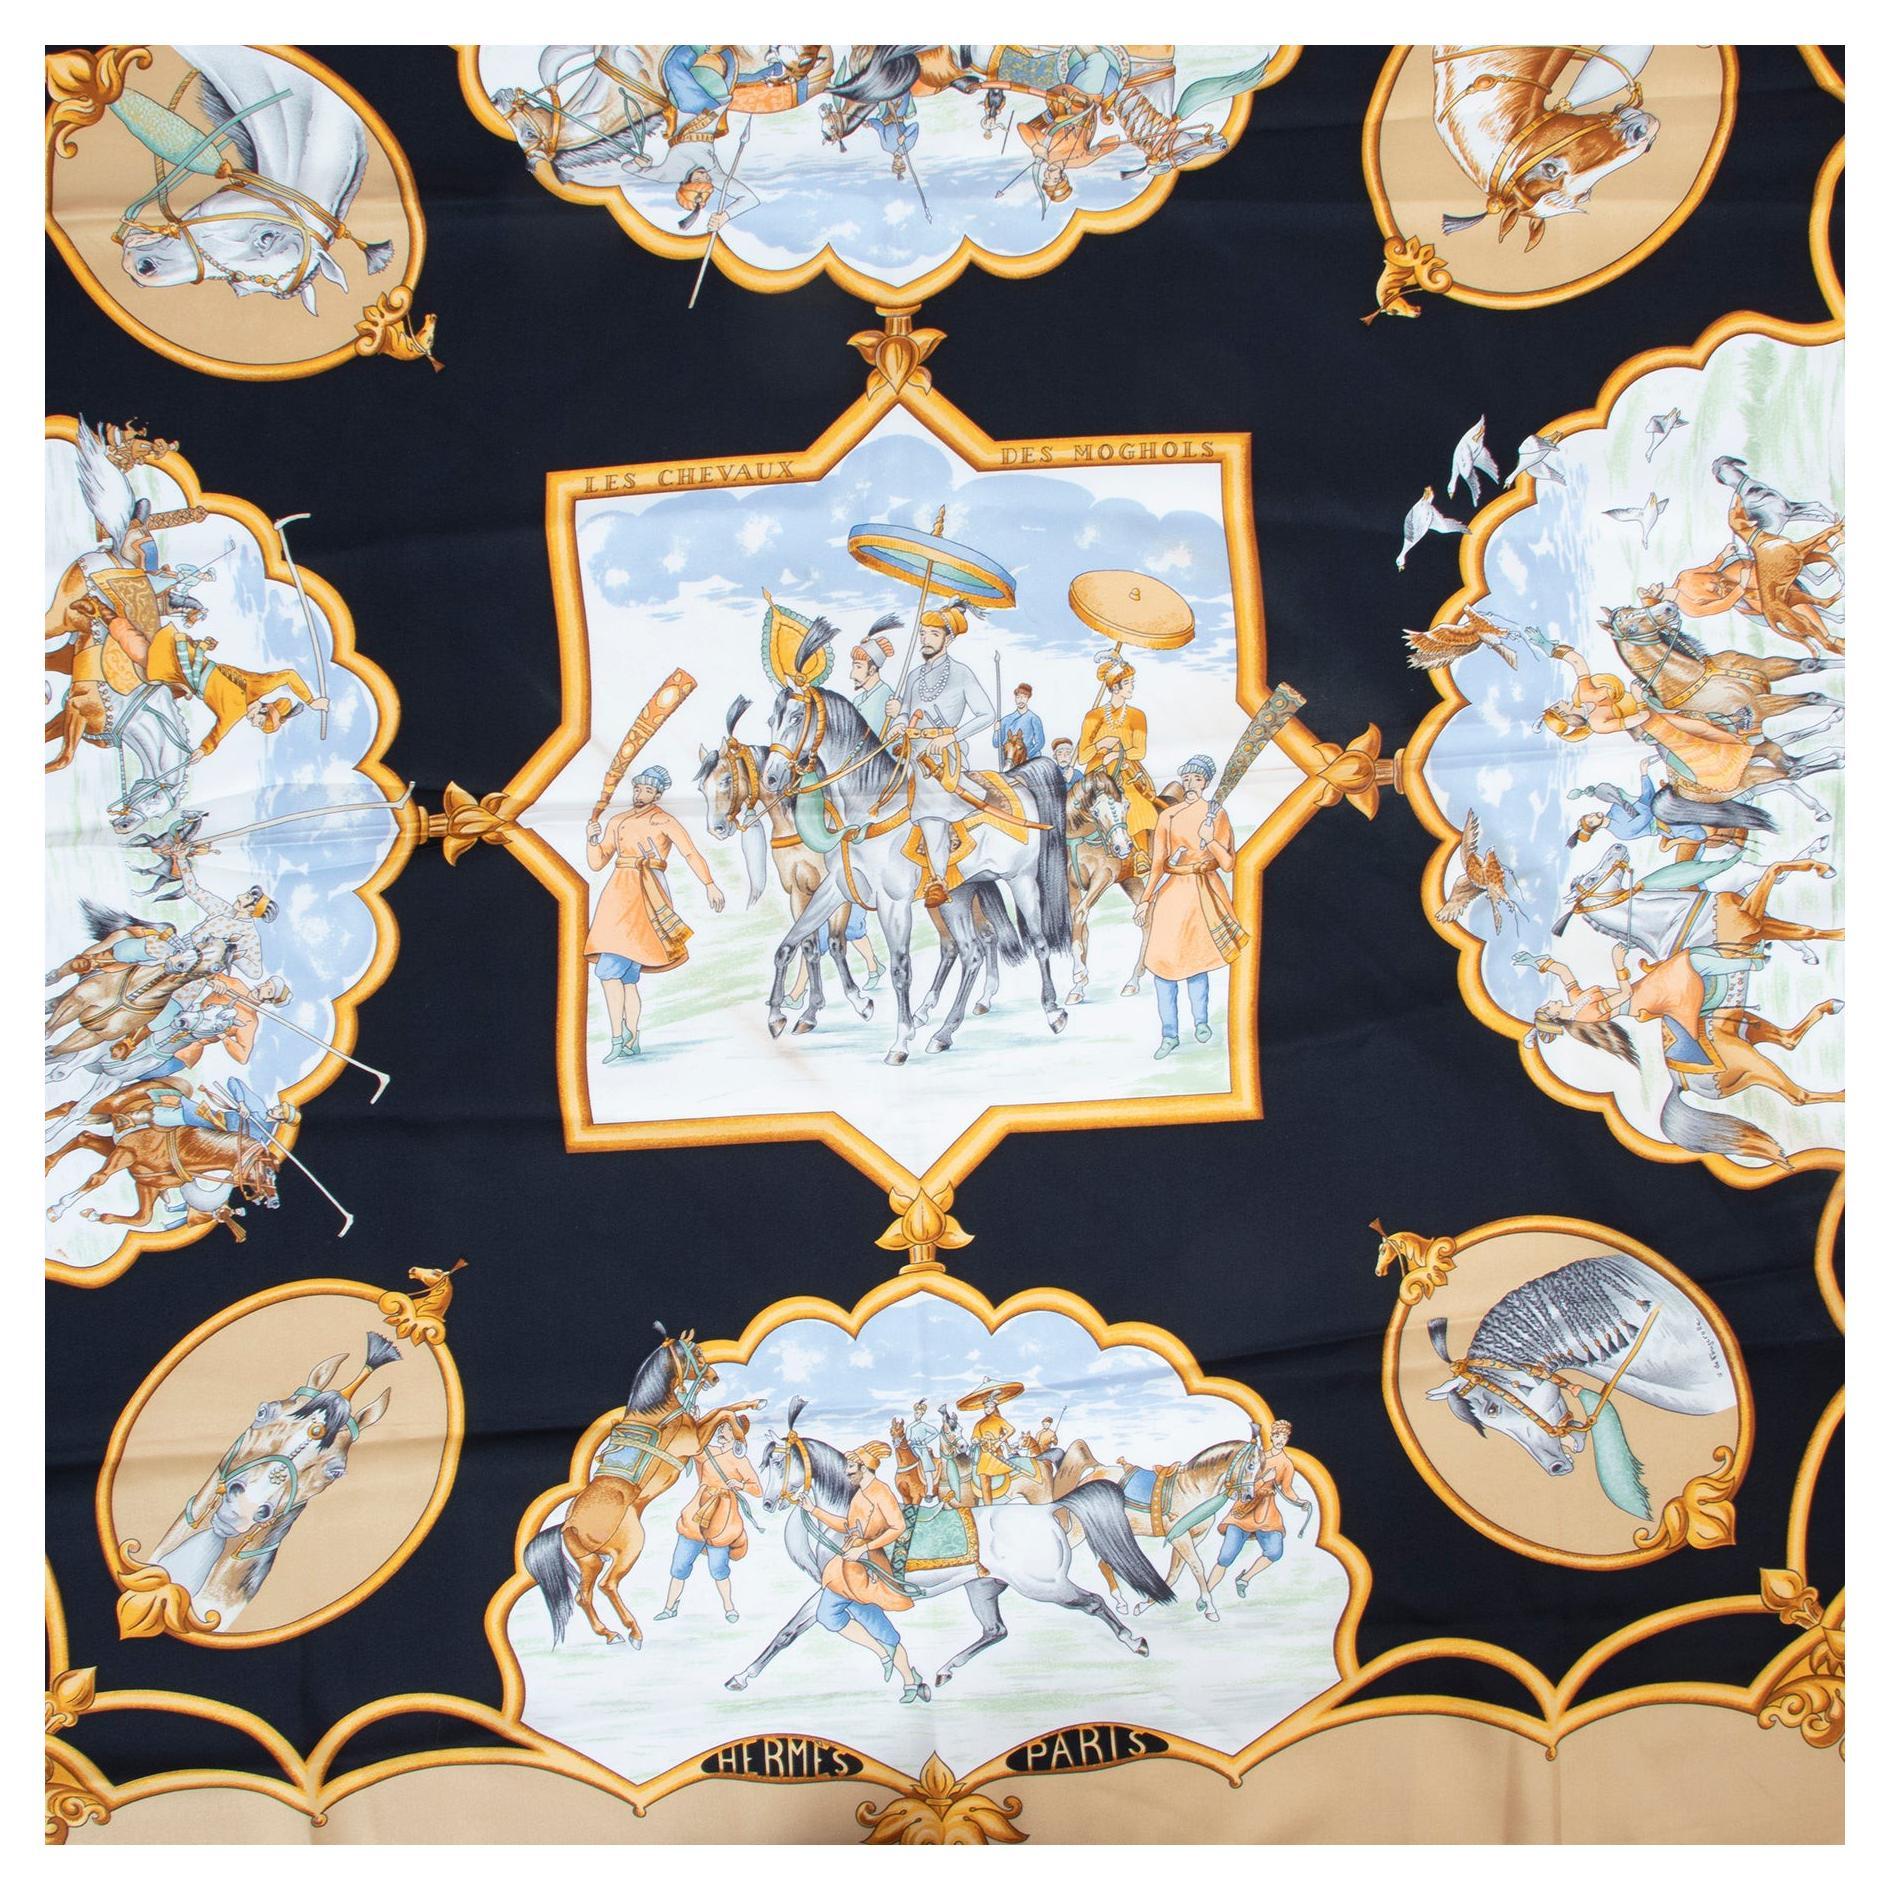 Hermès Beige Silk Les Chevaux Des Moghols Carré 90 Scarf

A beautiful silk scarf on which the beige and black color are most prominent. If you are found of horses this must be yours as the nicest combination of 